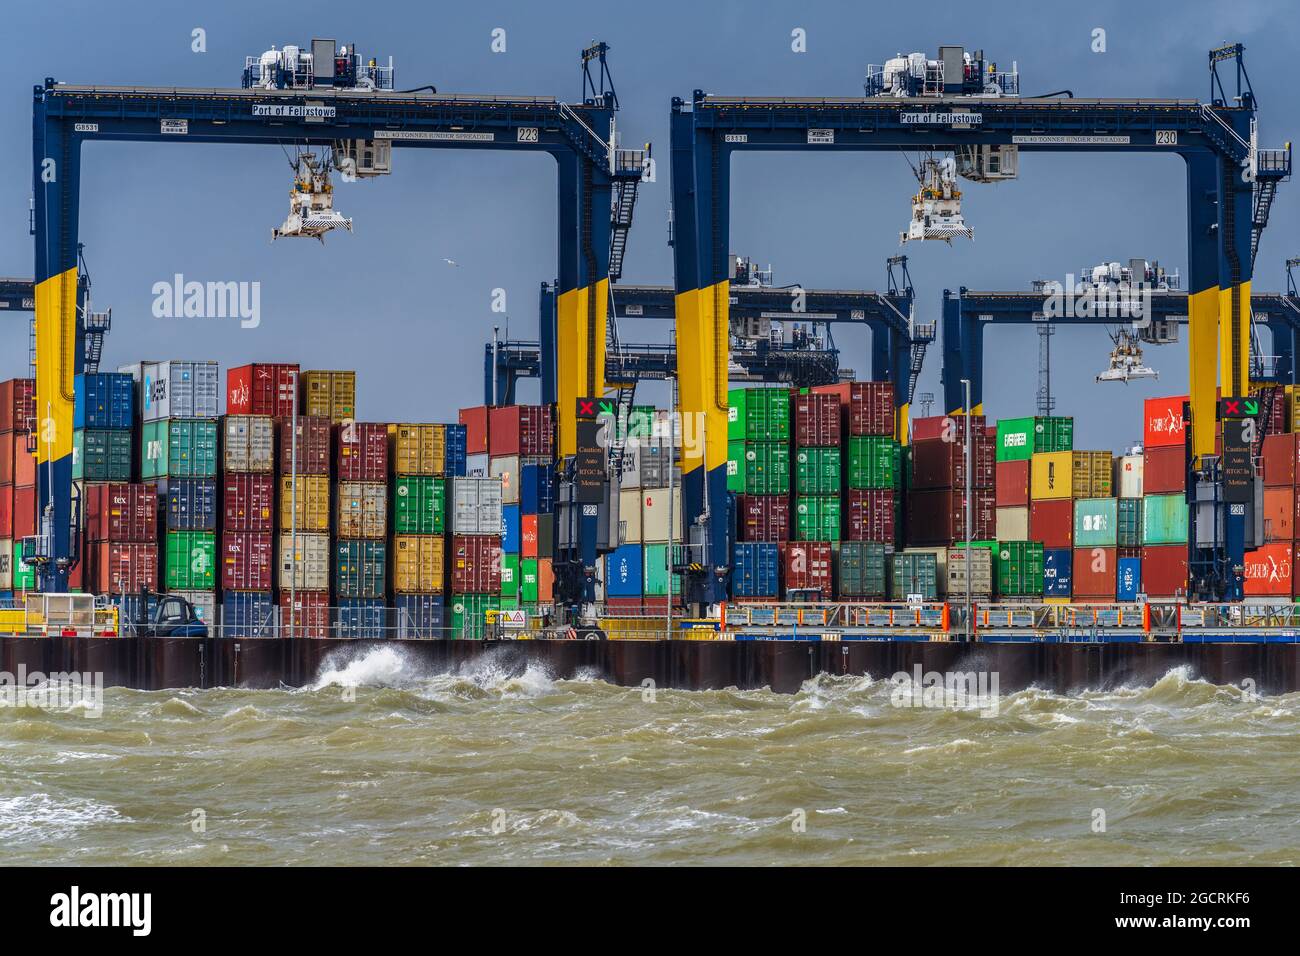 Global Supply Chains - Containers on the dockside at the Port of Felixstowe UK during stormy weather. Global Supply Chain Congestion. Stock Photo